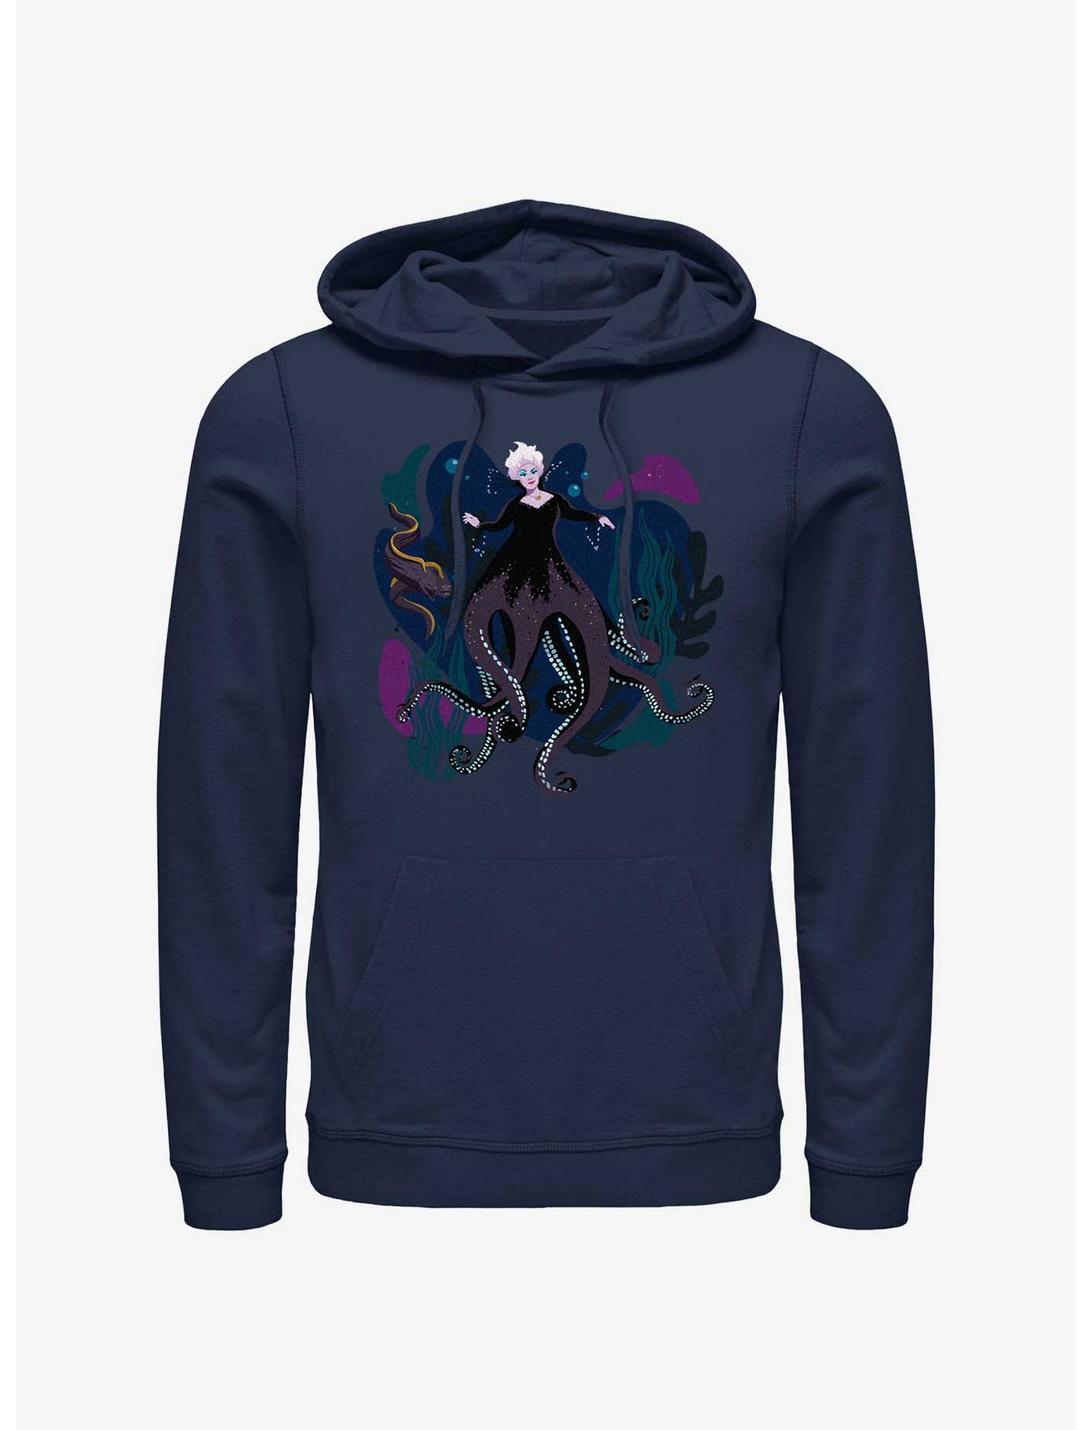 Disney The Little Mermaid Live Action Ursula With Flotsam and Jetsam Hoodie, NAVY, hi-res